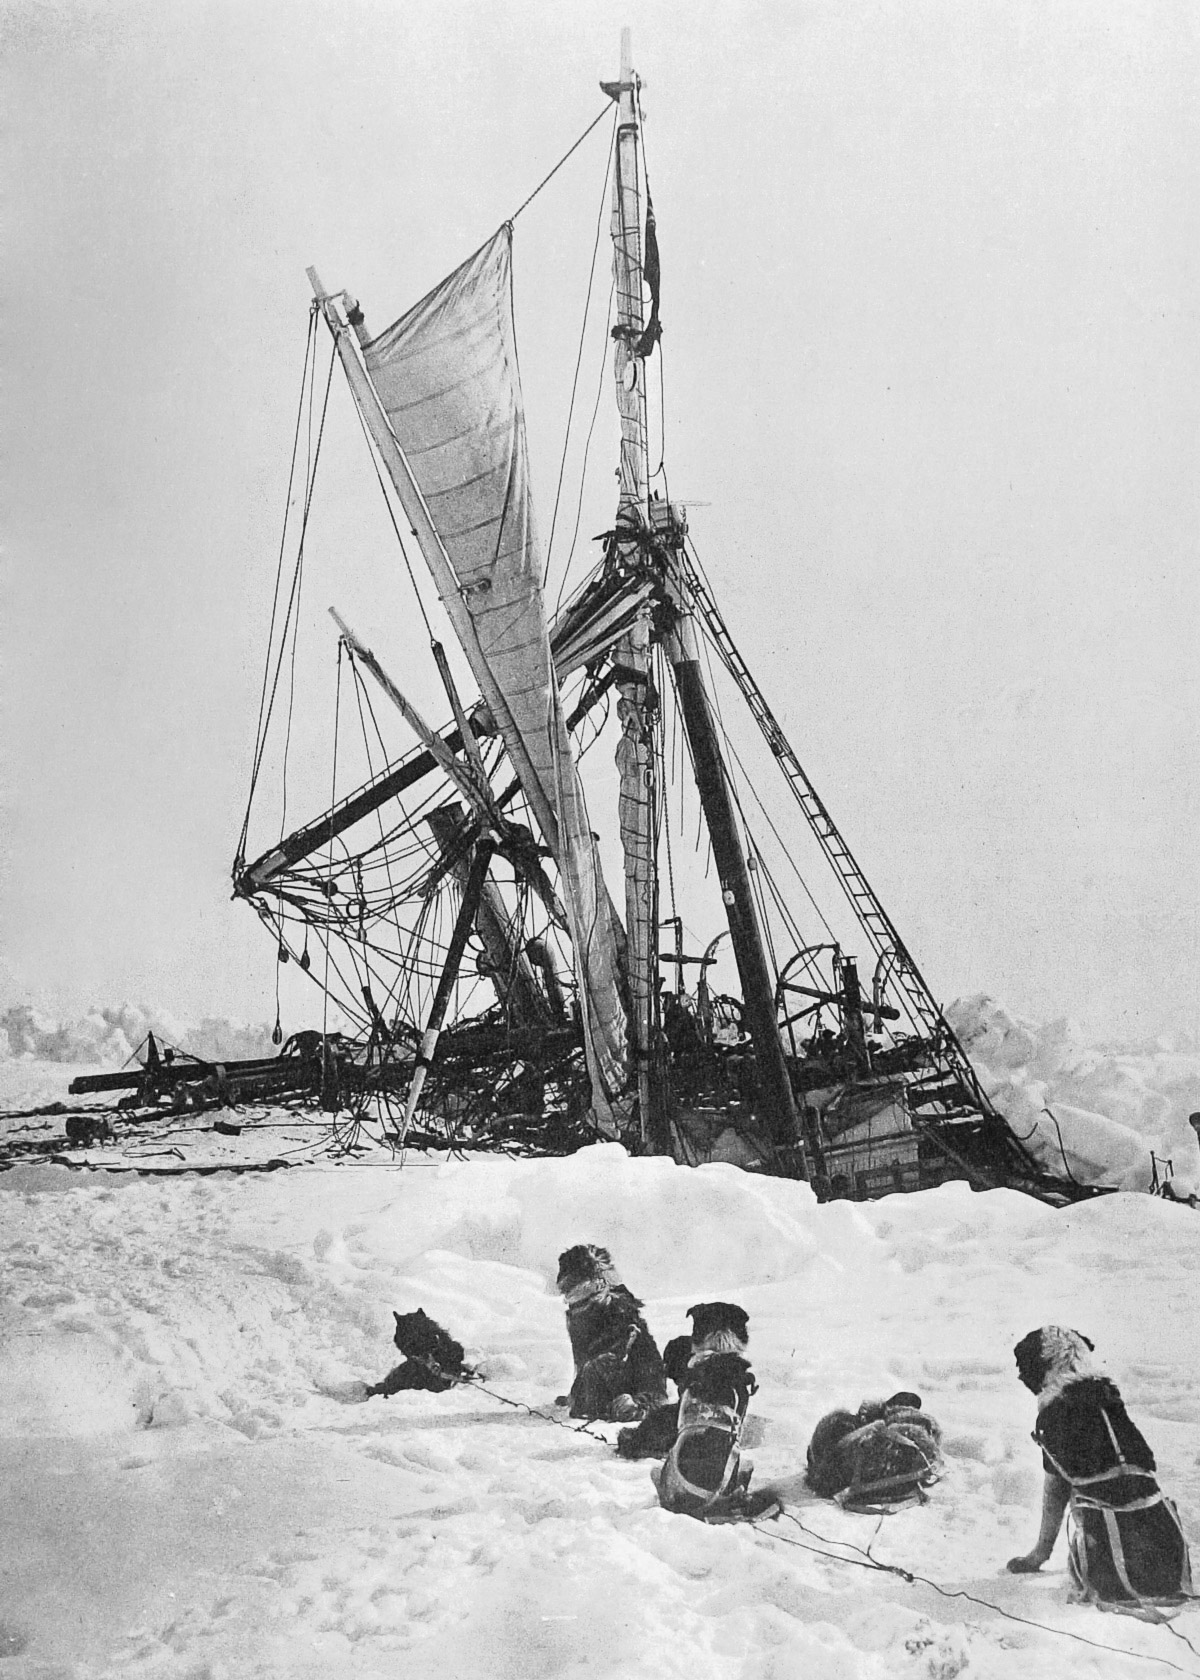 circa JANUARY 1915, The wrecked ship of the Shackleton's Antarctic expedition, SS Endurance, stuck in the ice in the Weddell Sea, circa January 1915. (Photo by Photo12/UIG/Getty Images)